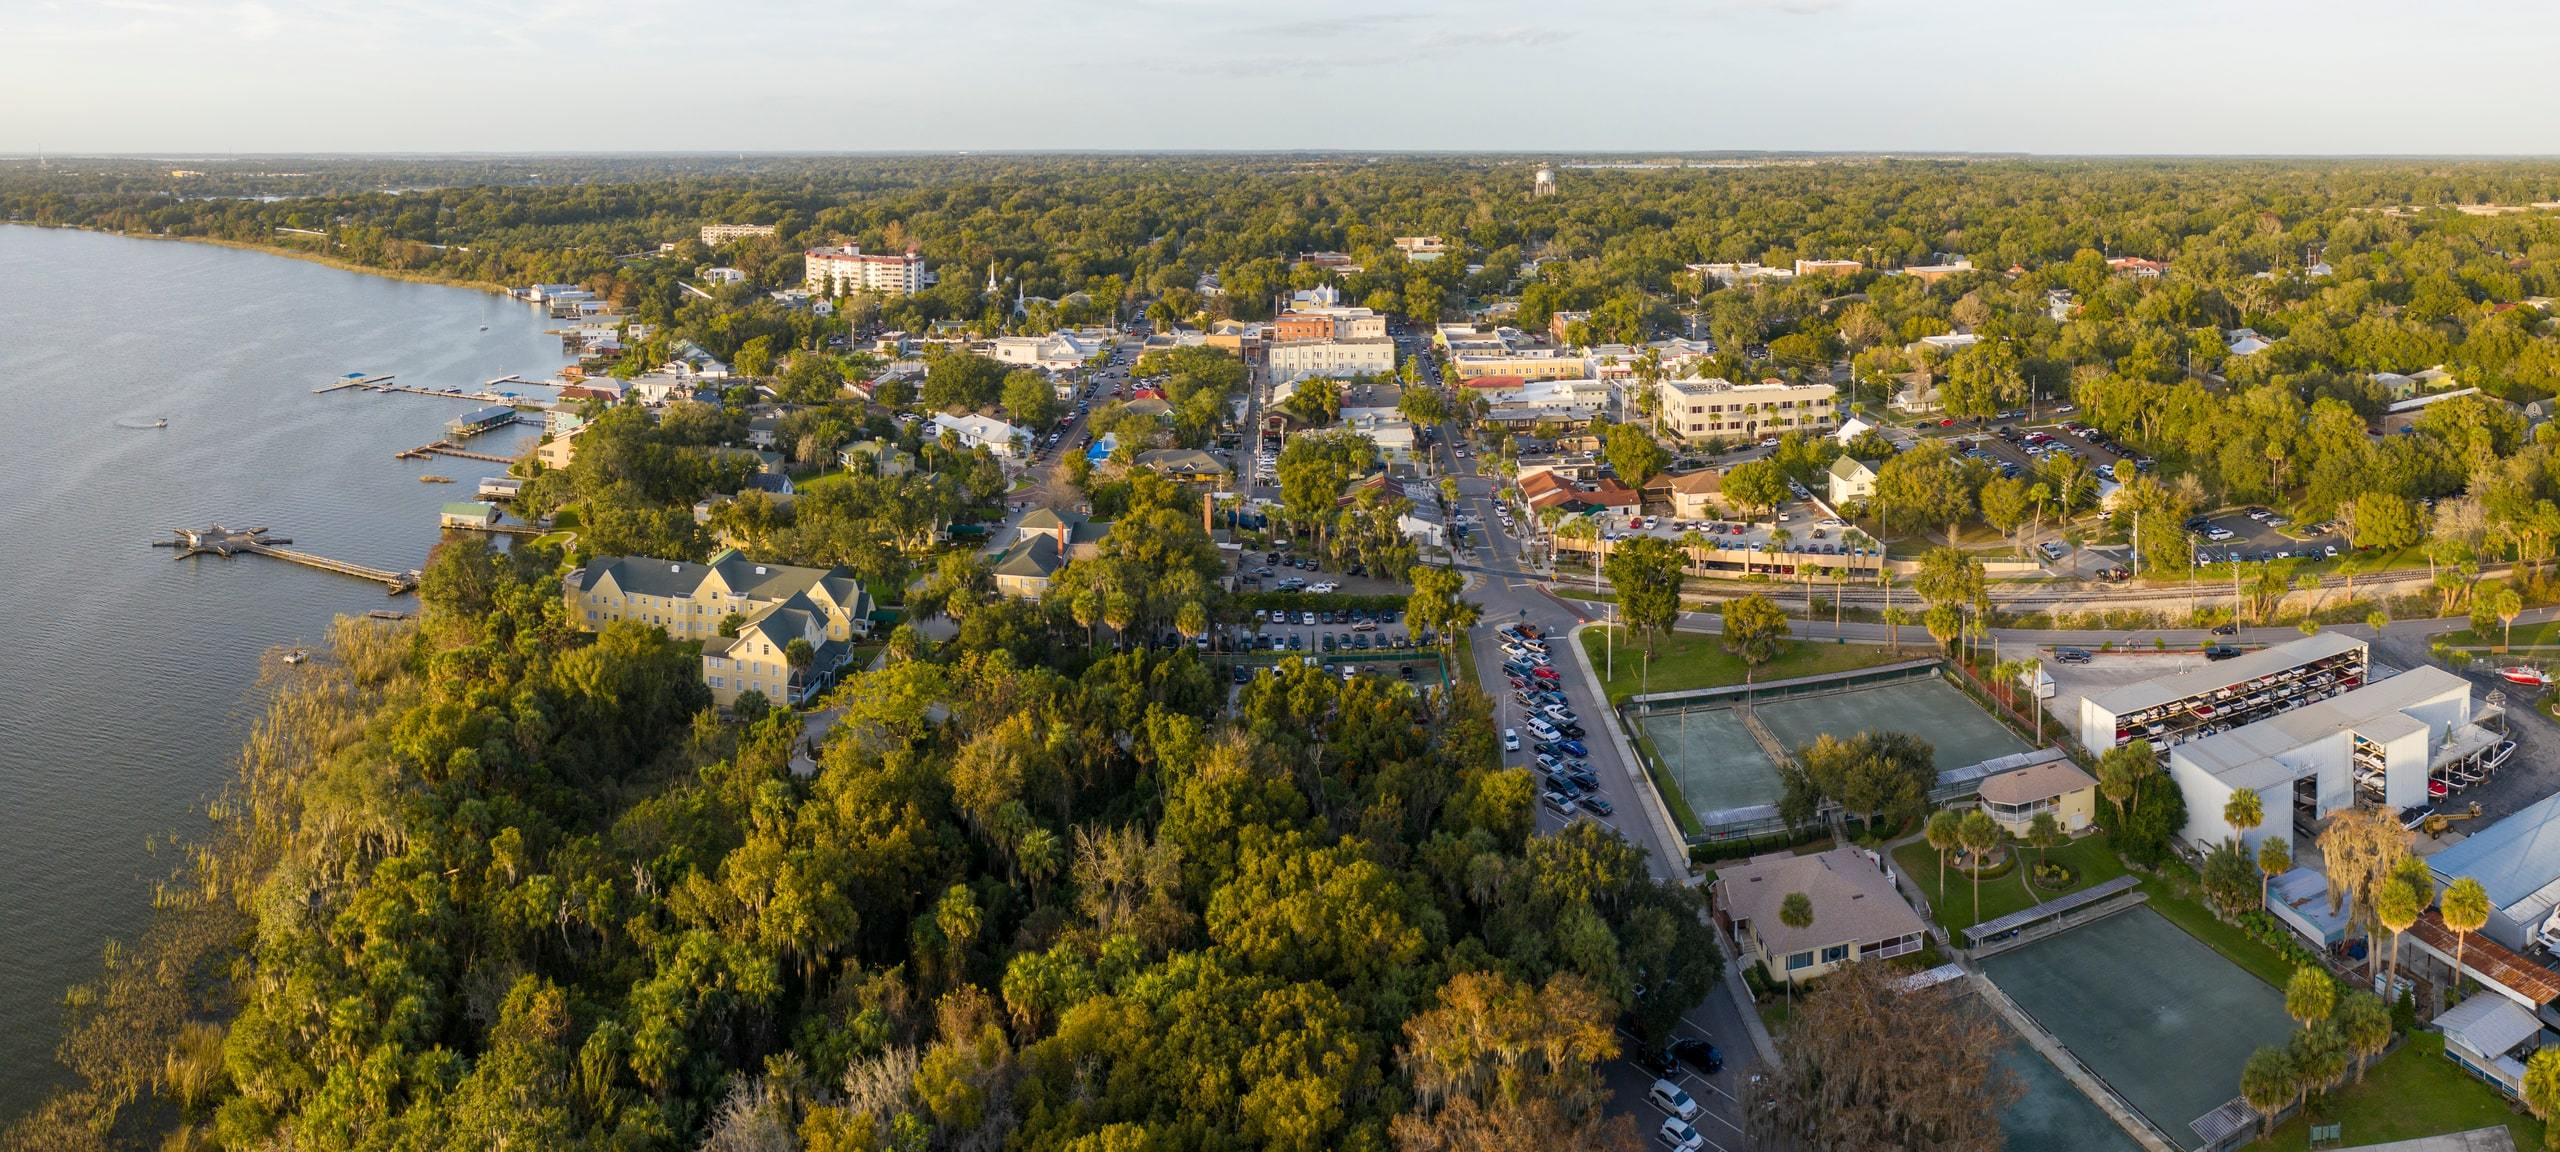 Aerial view over Mount Dora, FL waterfront and downtown area during sunset